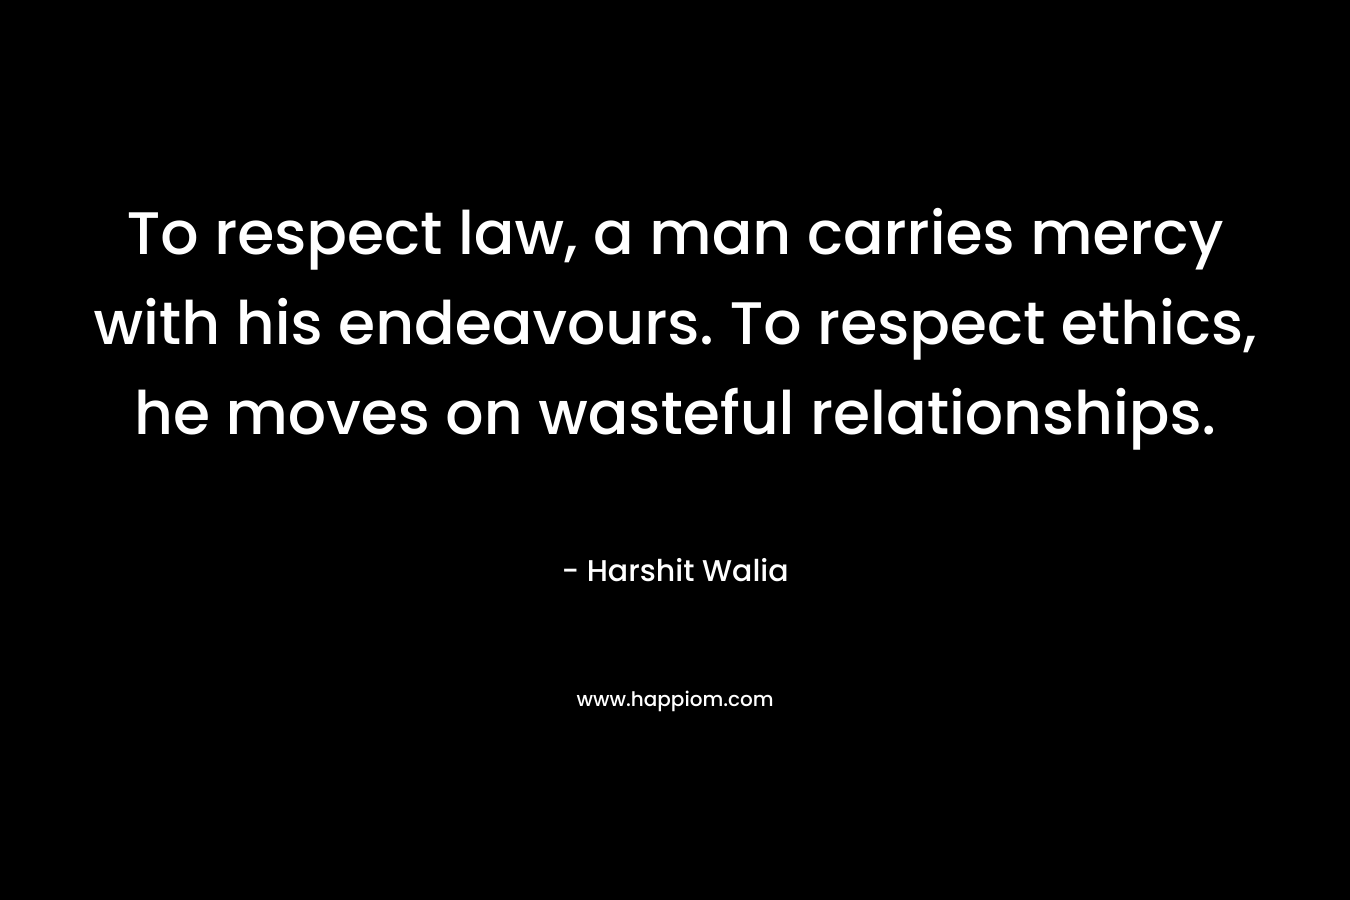 To respect law, a man carries mercy with his endeavours. To respect ethics, he moves on wasteful relationships. – Harshit Walia